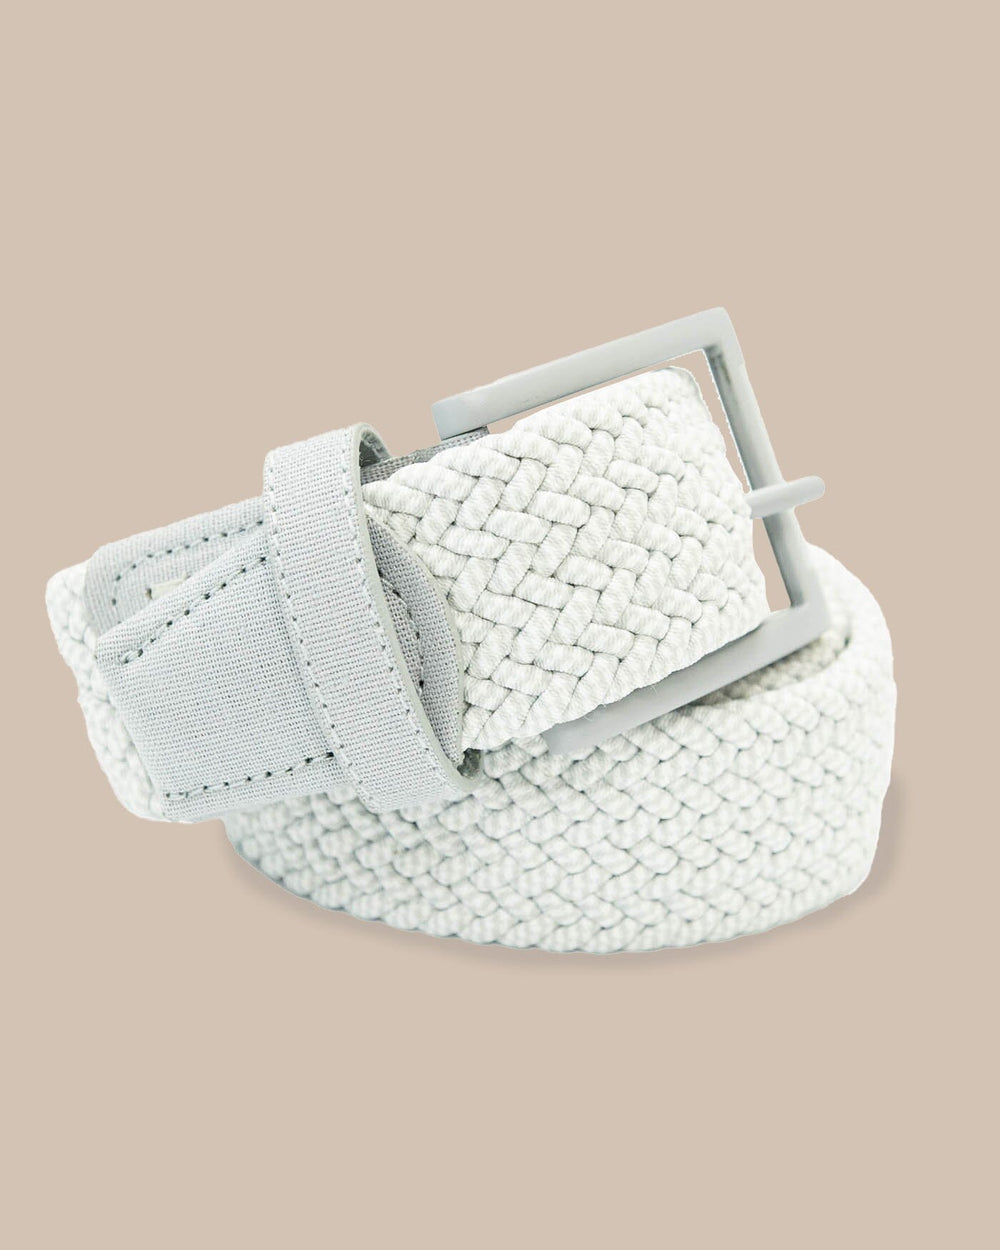 The front view of the Southern Tide Caddie Braided Belt by Southern Tide - Slate Grey